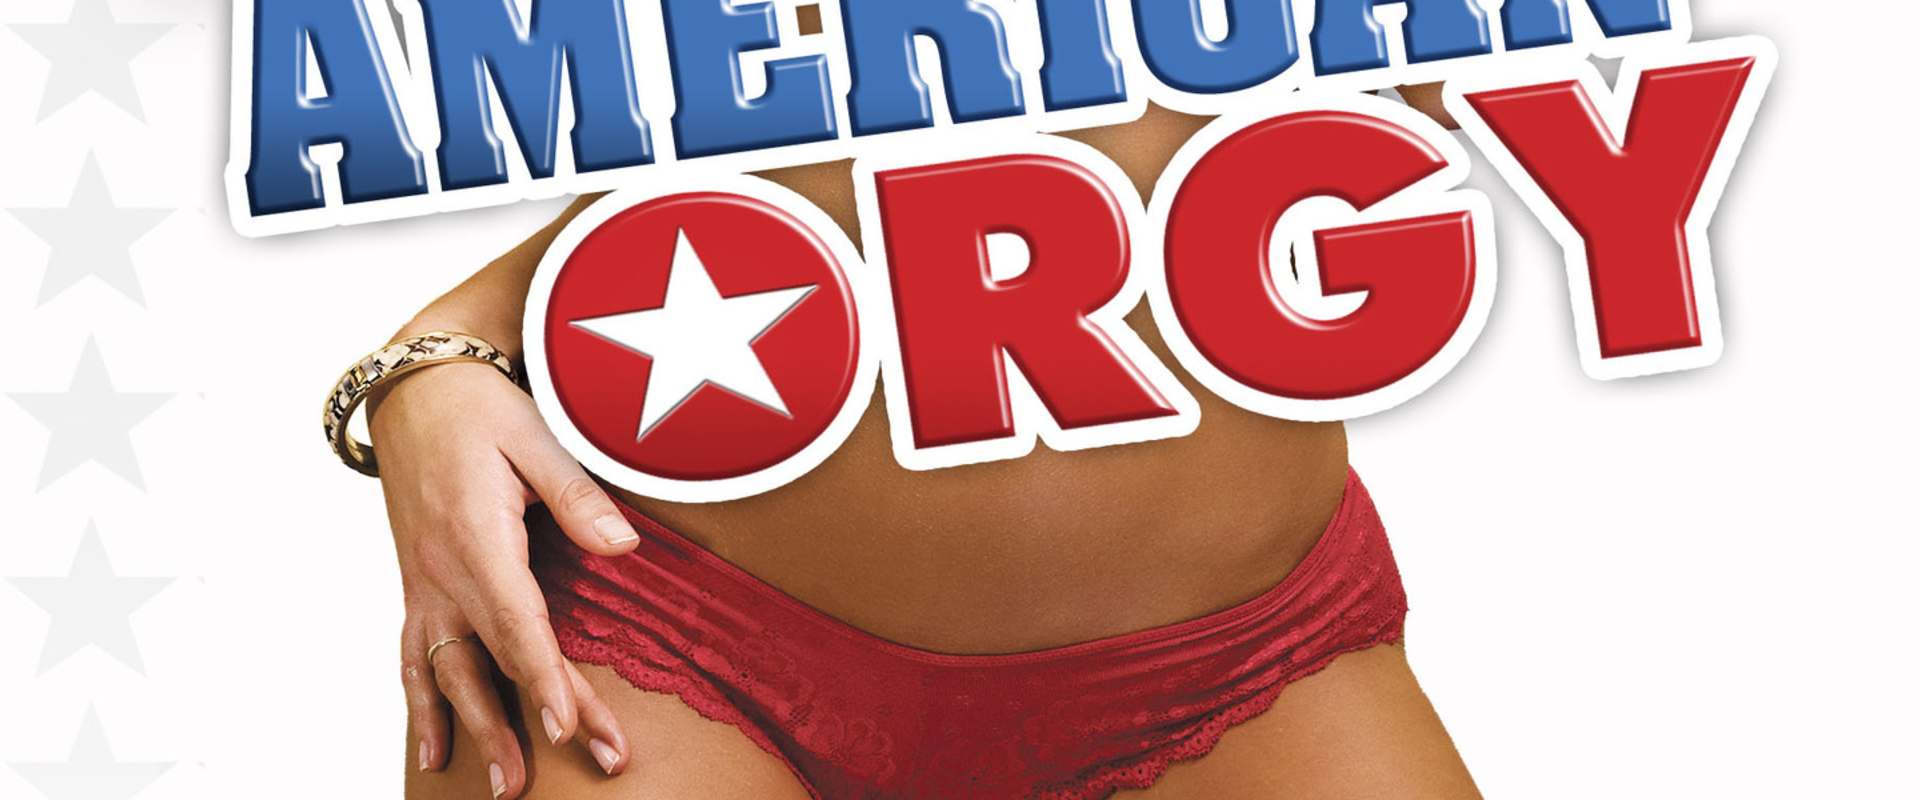 All American Orgy background 1